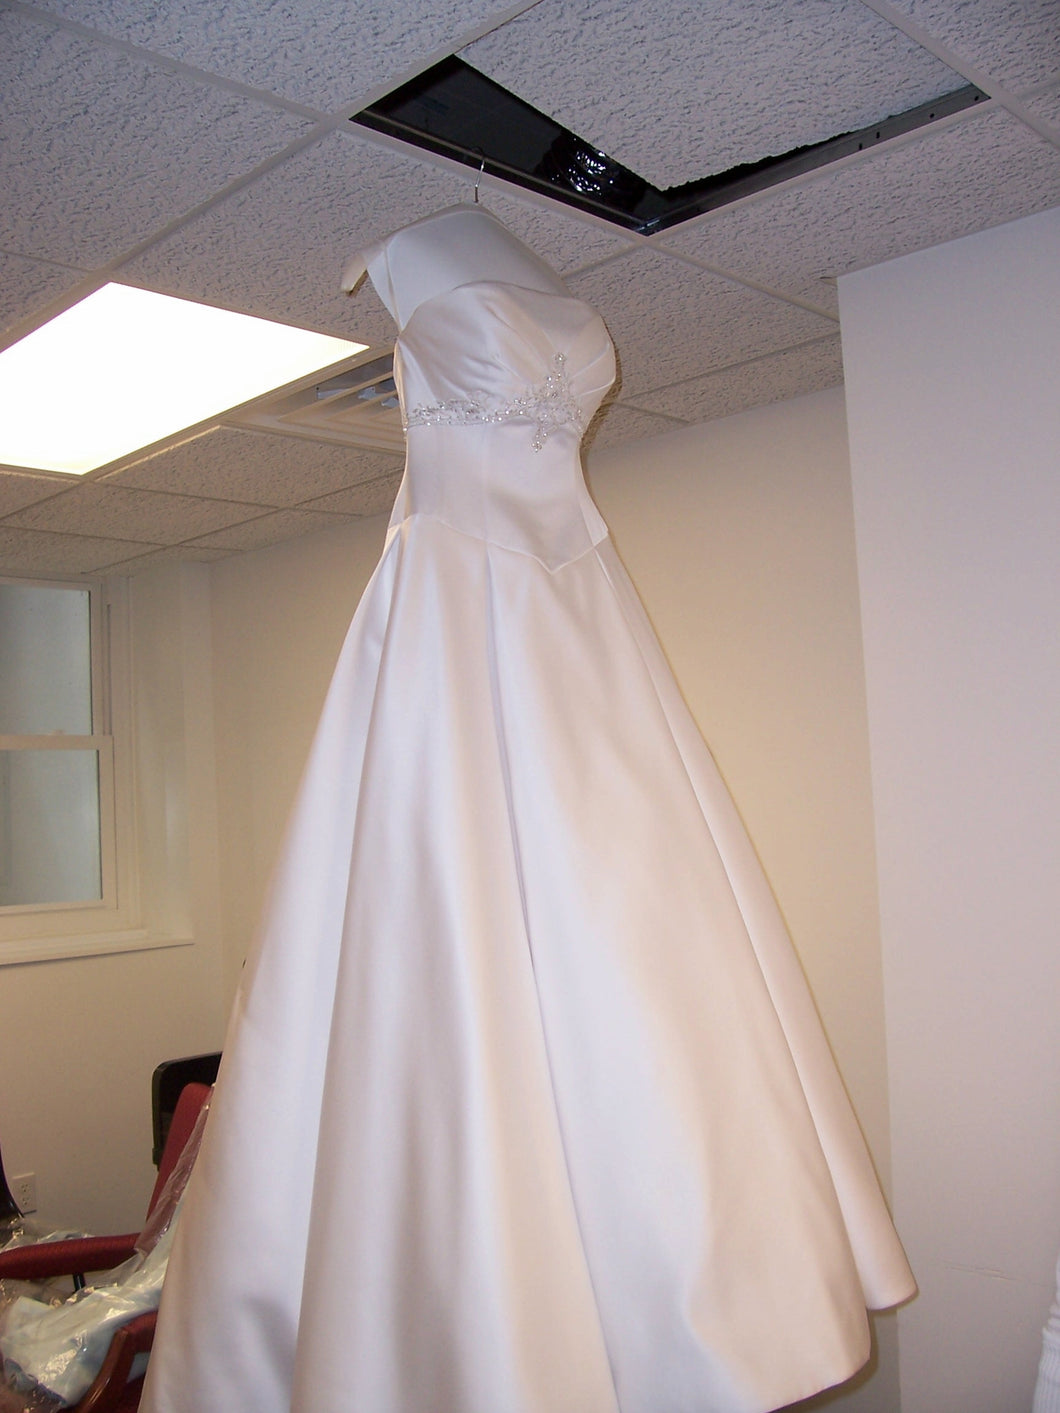 Allure Bridals 'Exclusive Edition' - Allure Bridals - Nearly Newlywed Bridal Boutique - 1